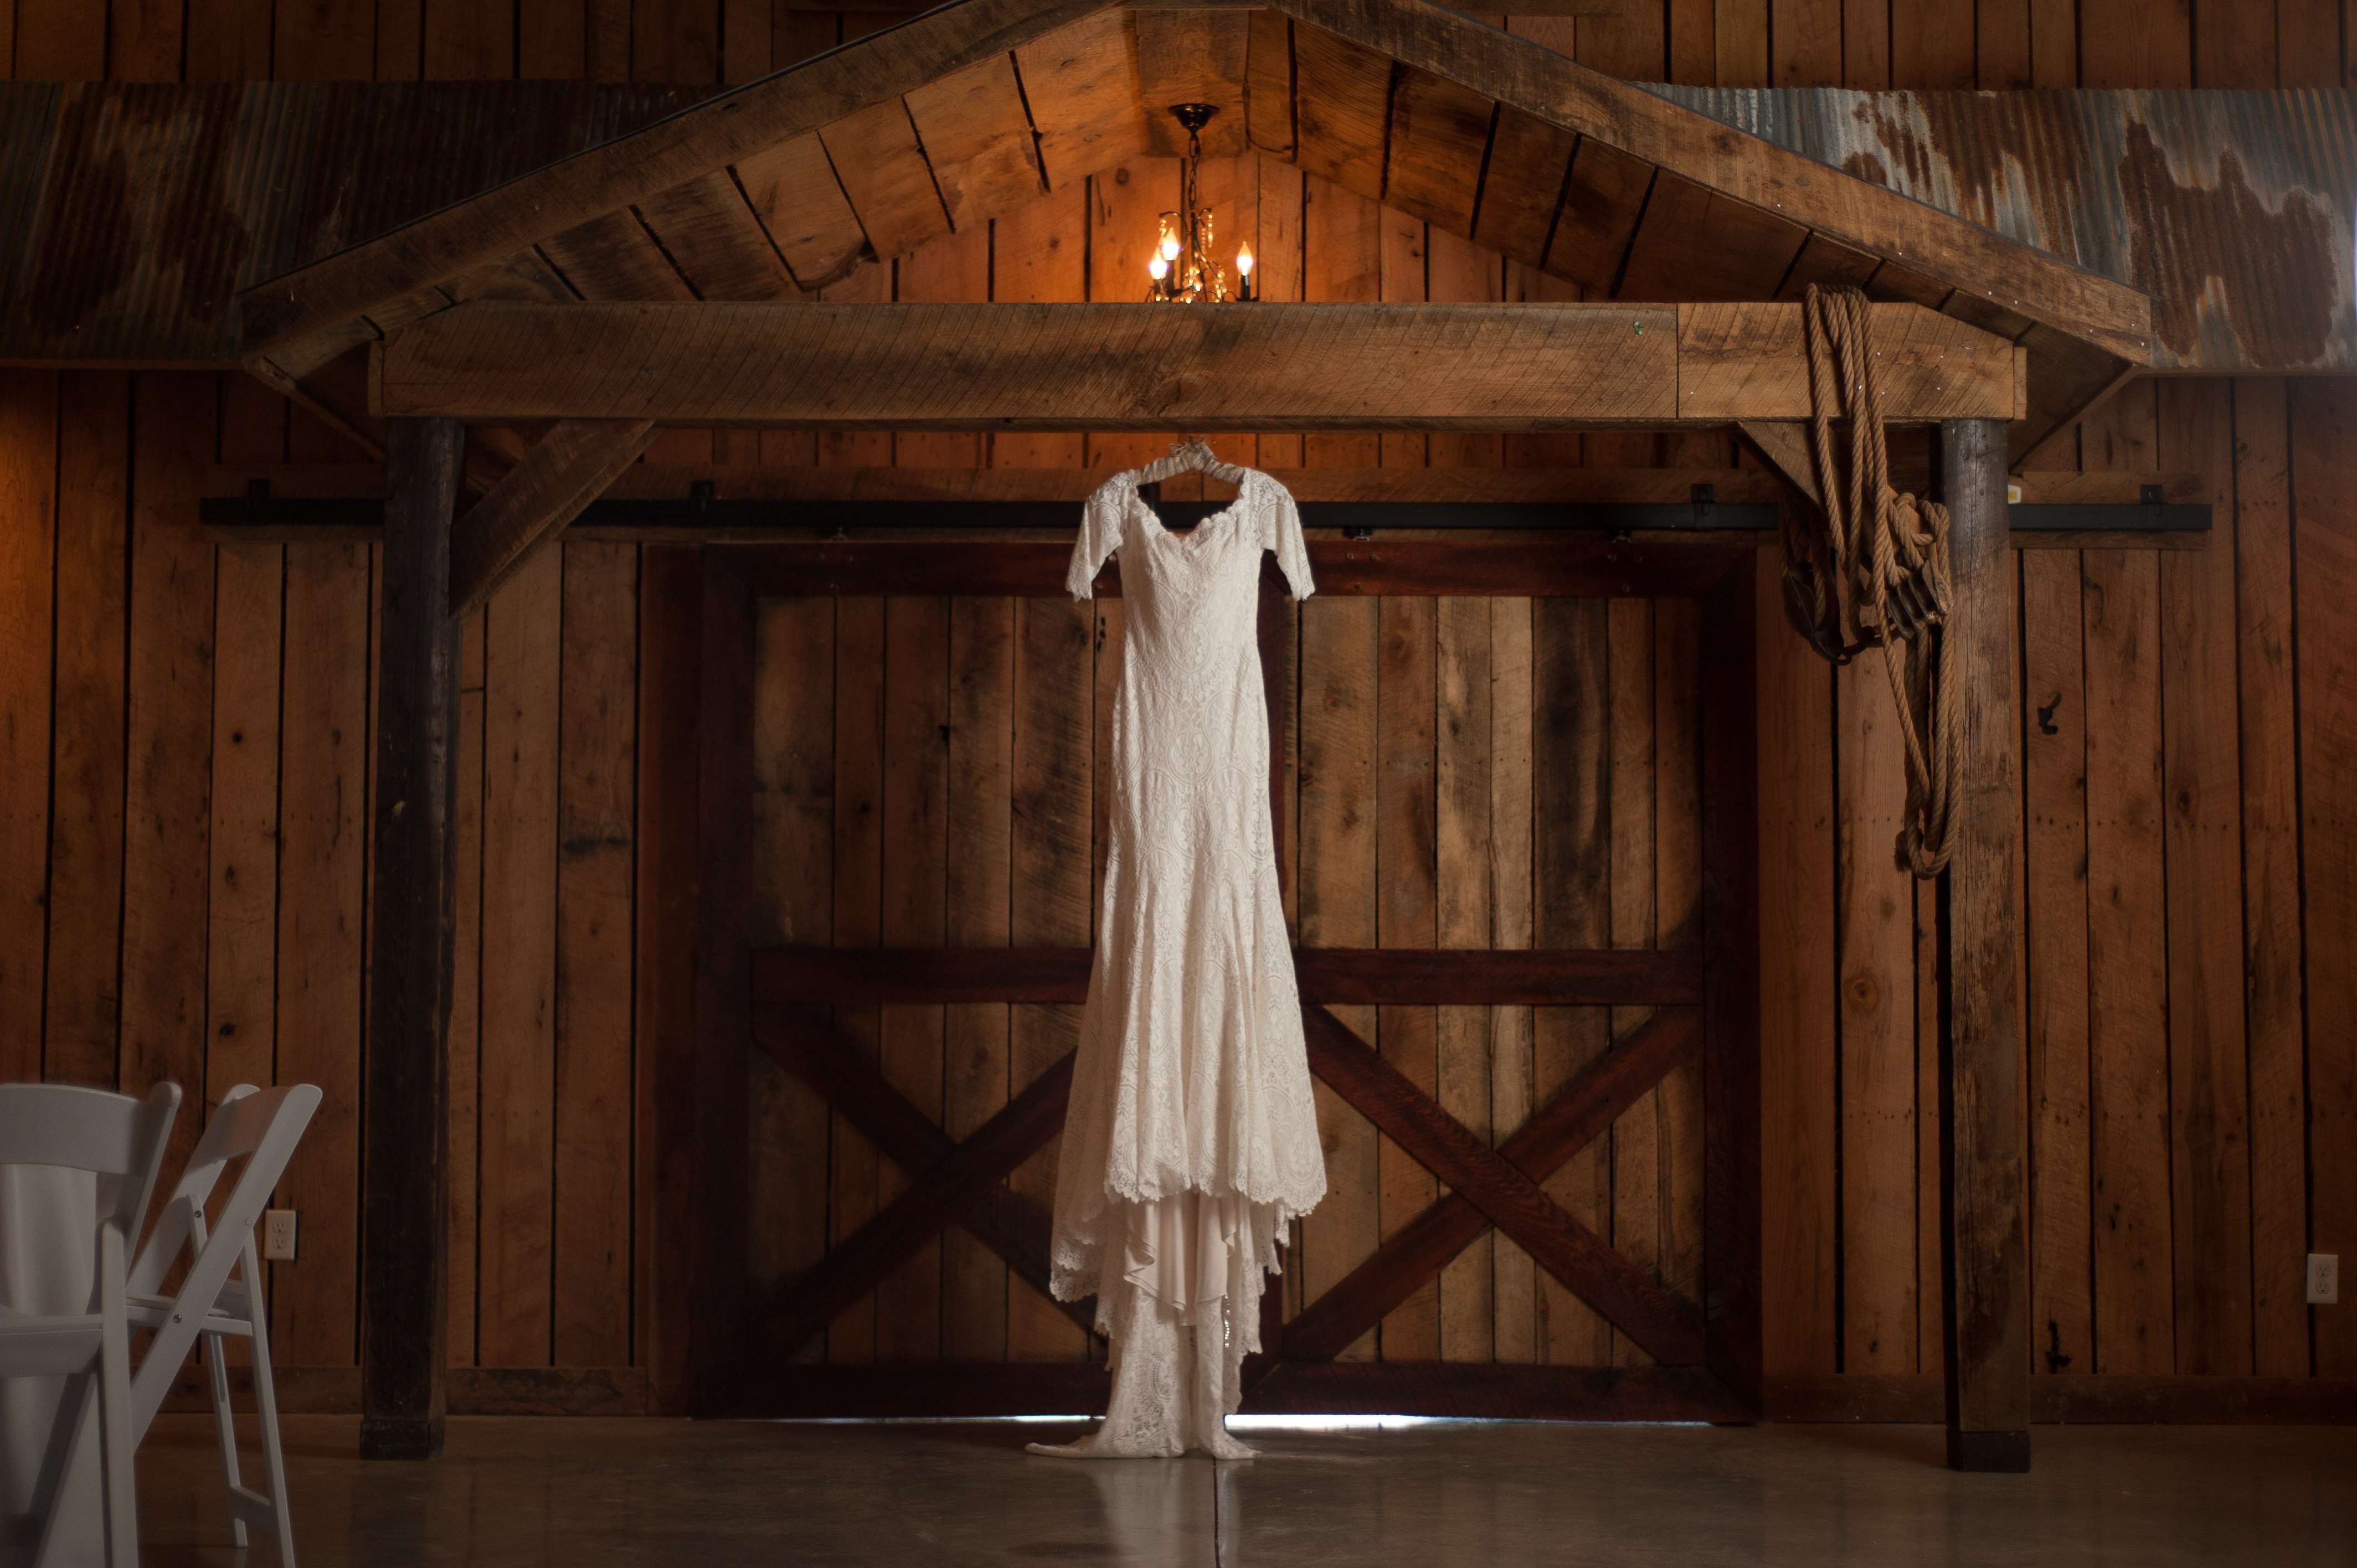 Wedding dress hanging from doorway with dramatic lighting.